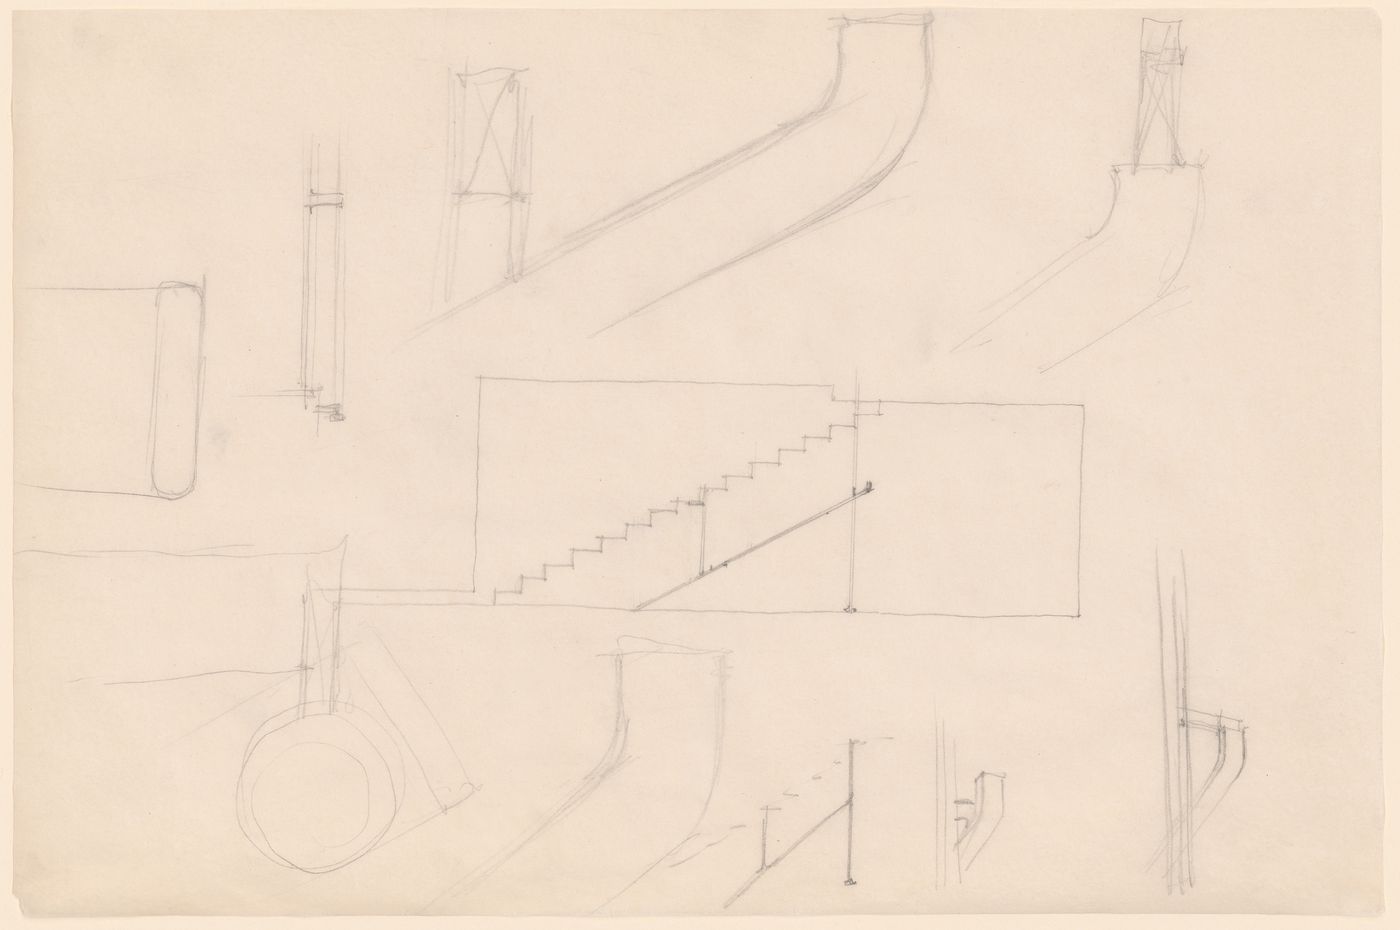 Stair elevation and bannister detail sketches for the Resor House Project, Jackson Hole, Wyoming